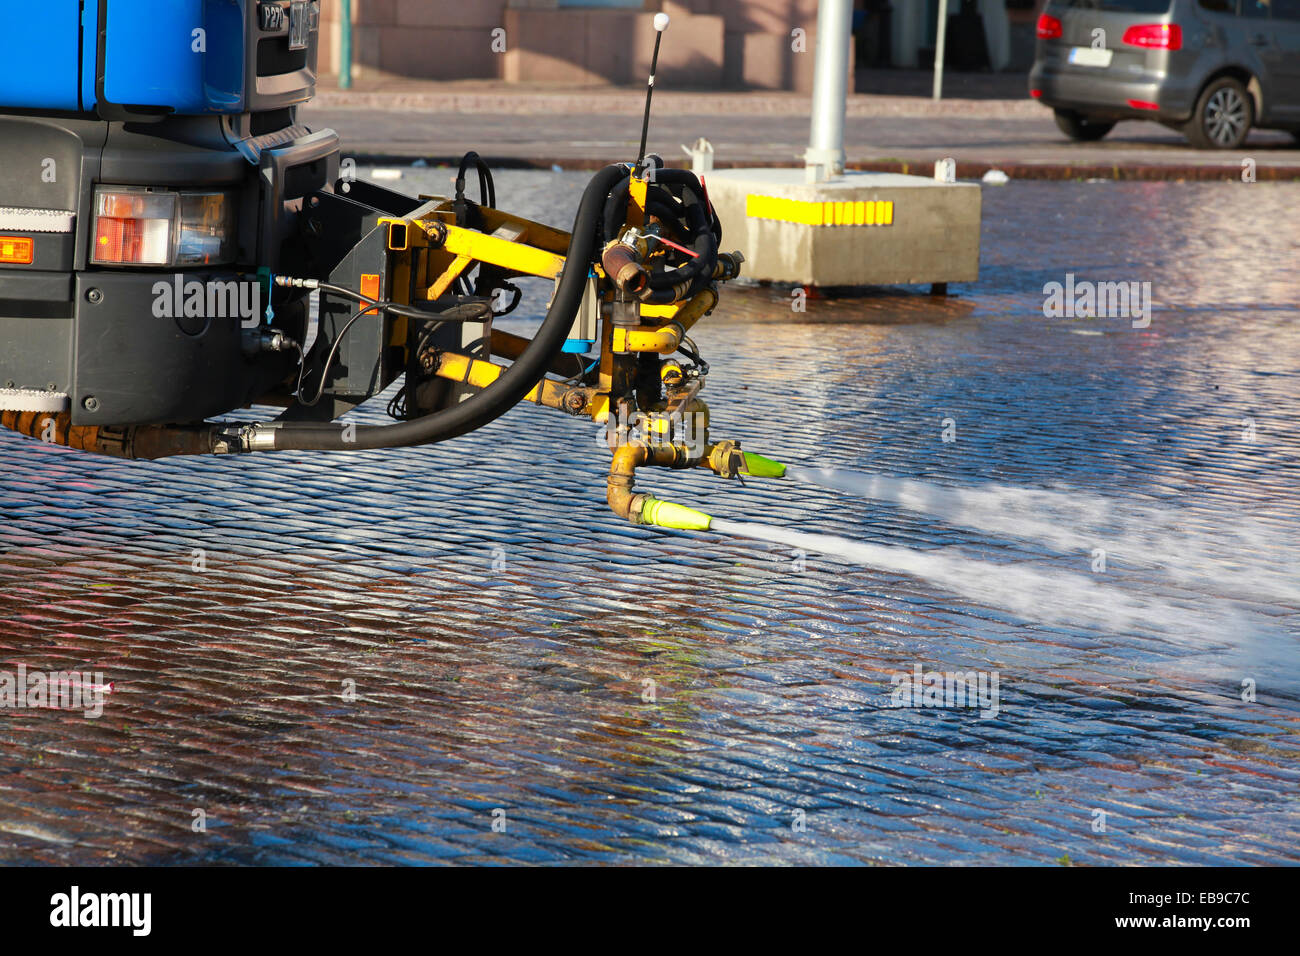 City street cleaning with water jets Stock Photo